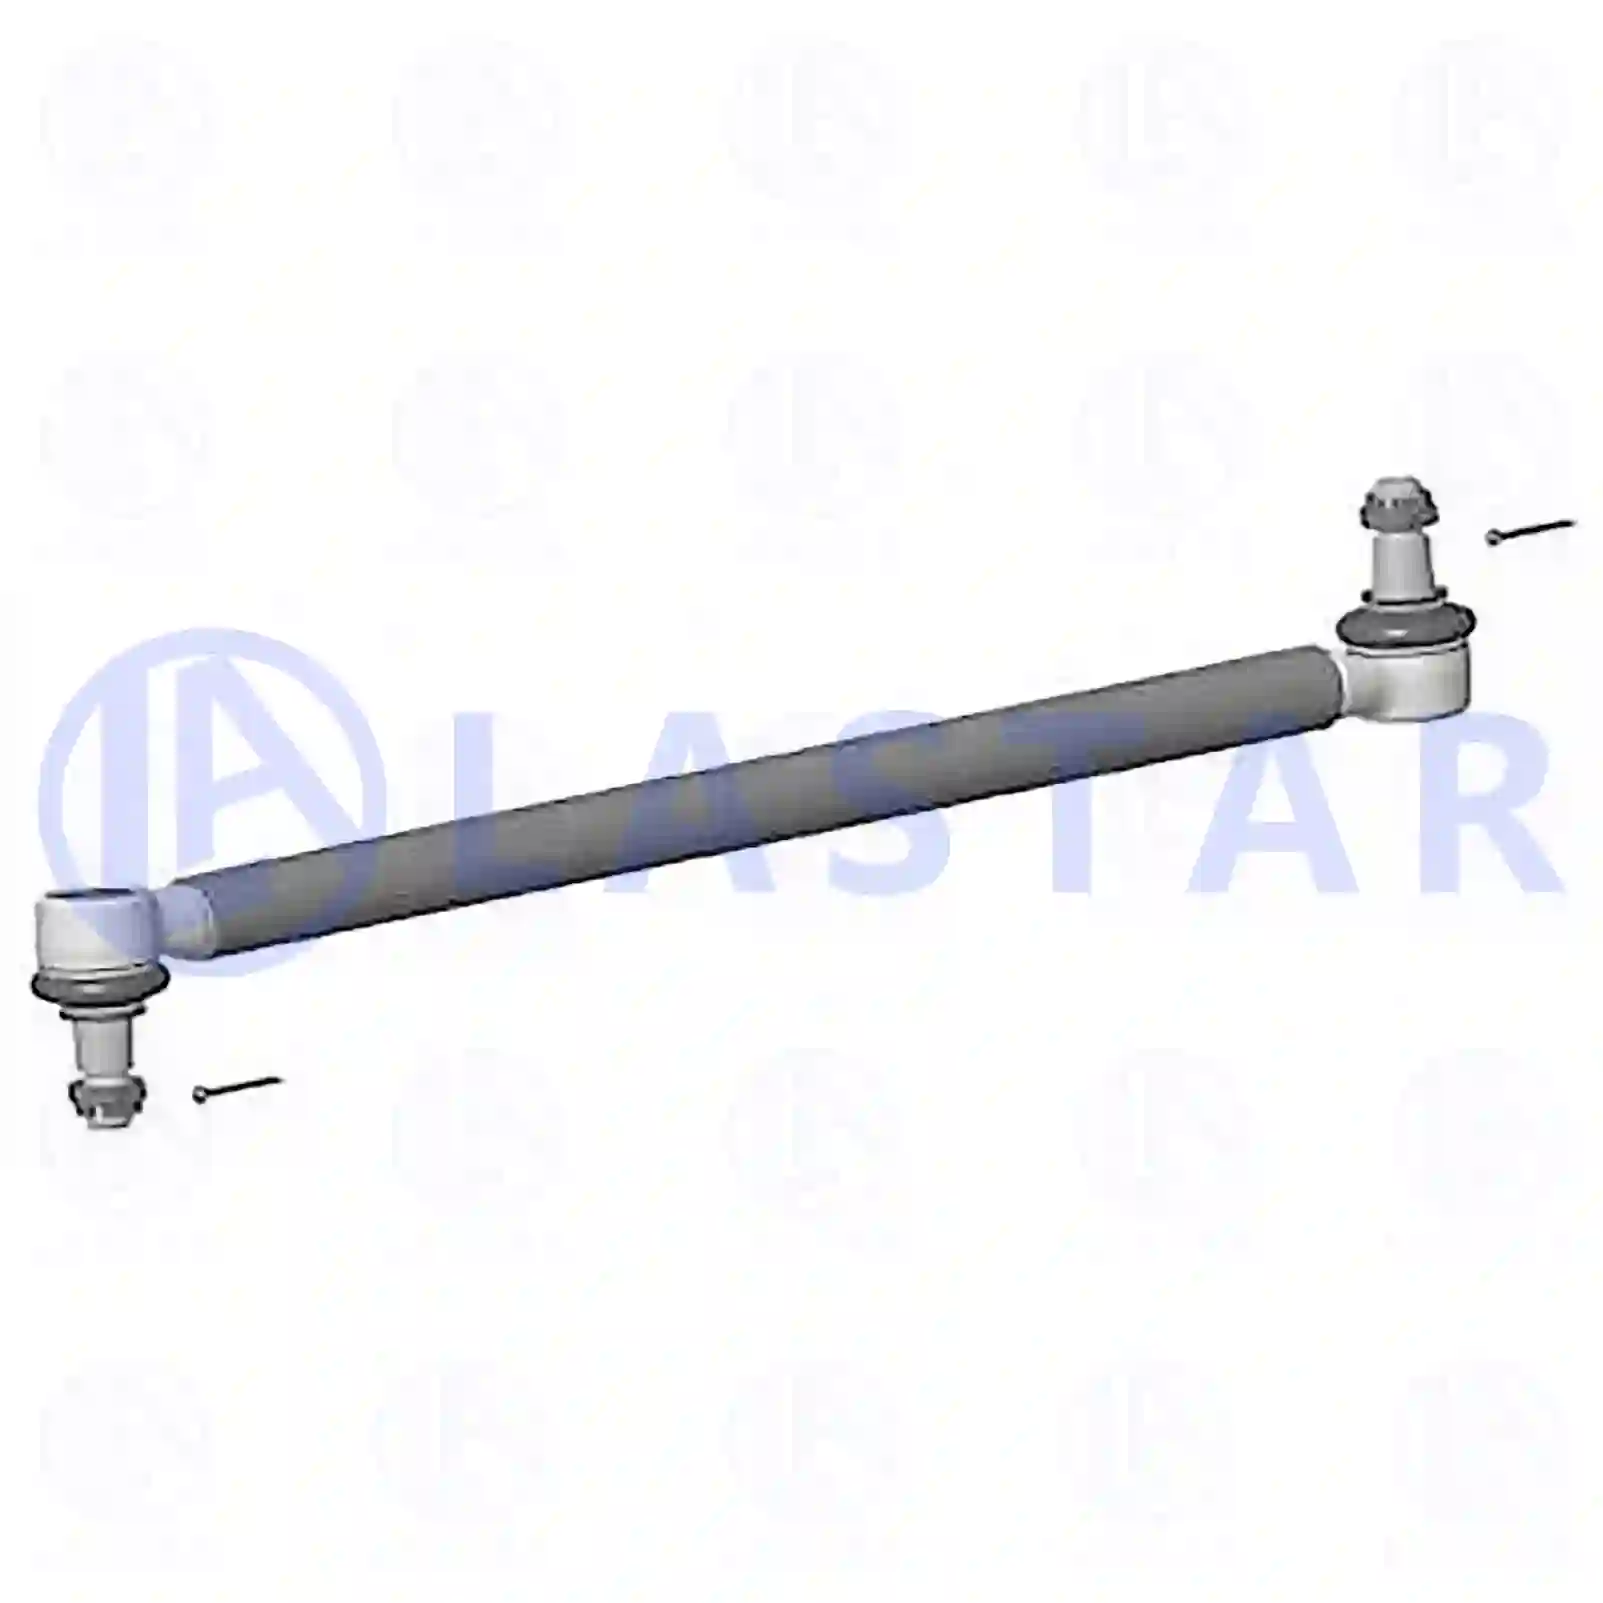 Track rod, 77730364, 504113826, 580189 ||  77730364 Lastar Spare Part | Truck Spare Parts, Auotomotive Spare Parts Track rod, 77730364, 504113826, 580189 ||  77730364 Lastar Spare Part | Truck Spare Parts, Auotomotive Spare Parts